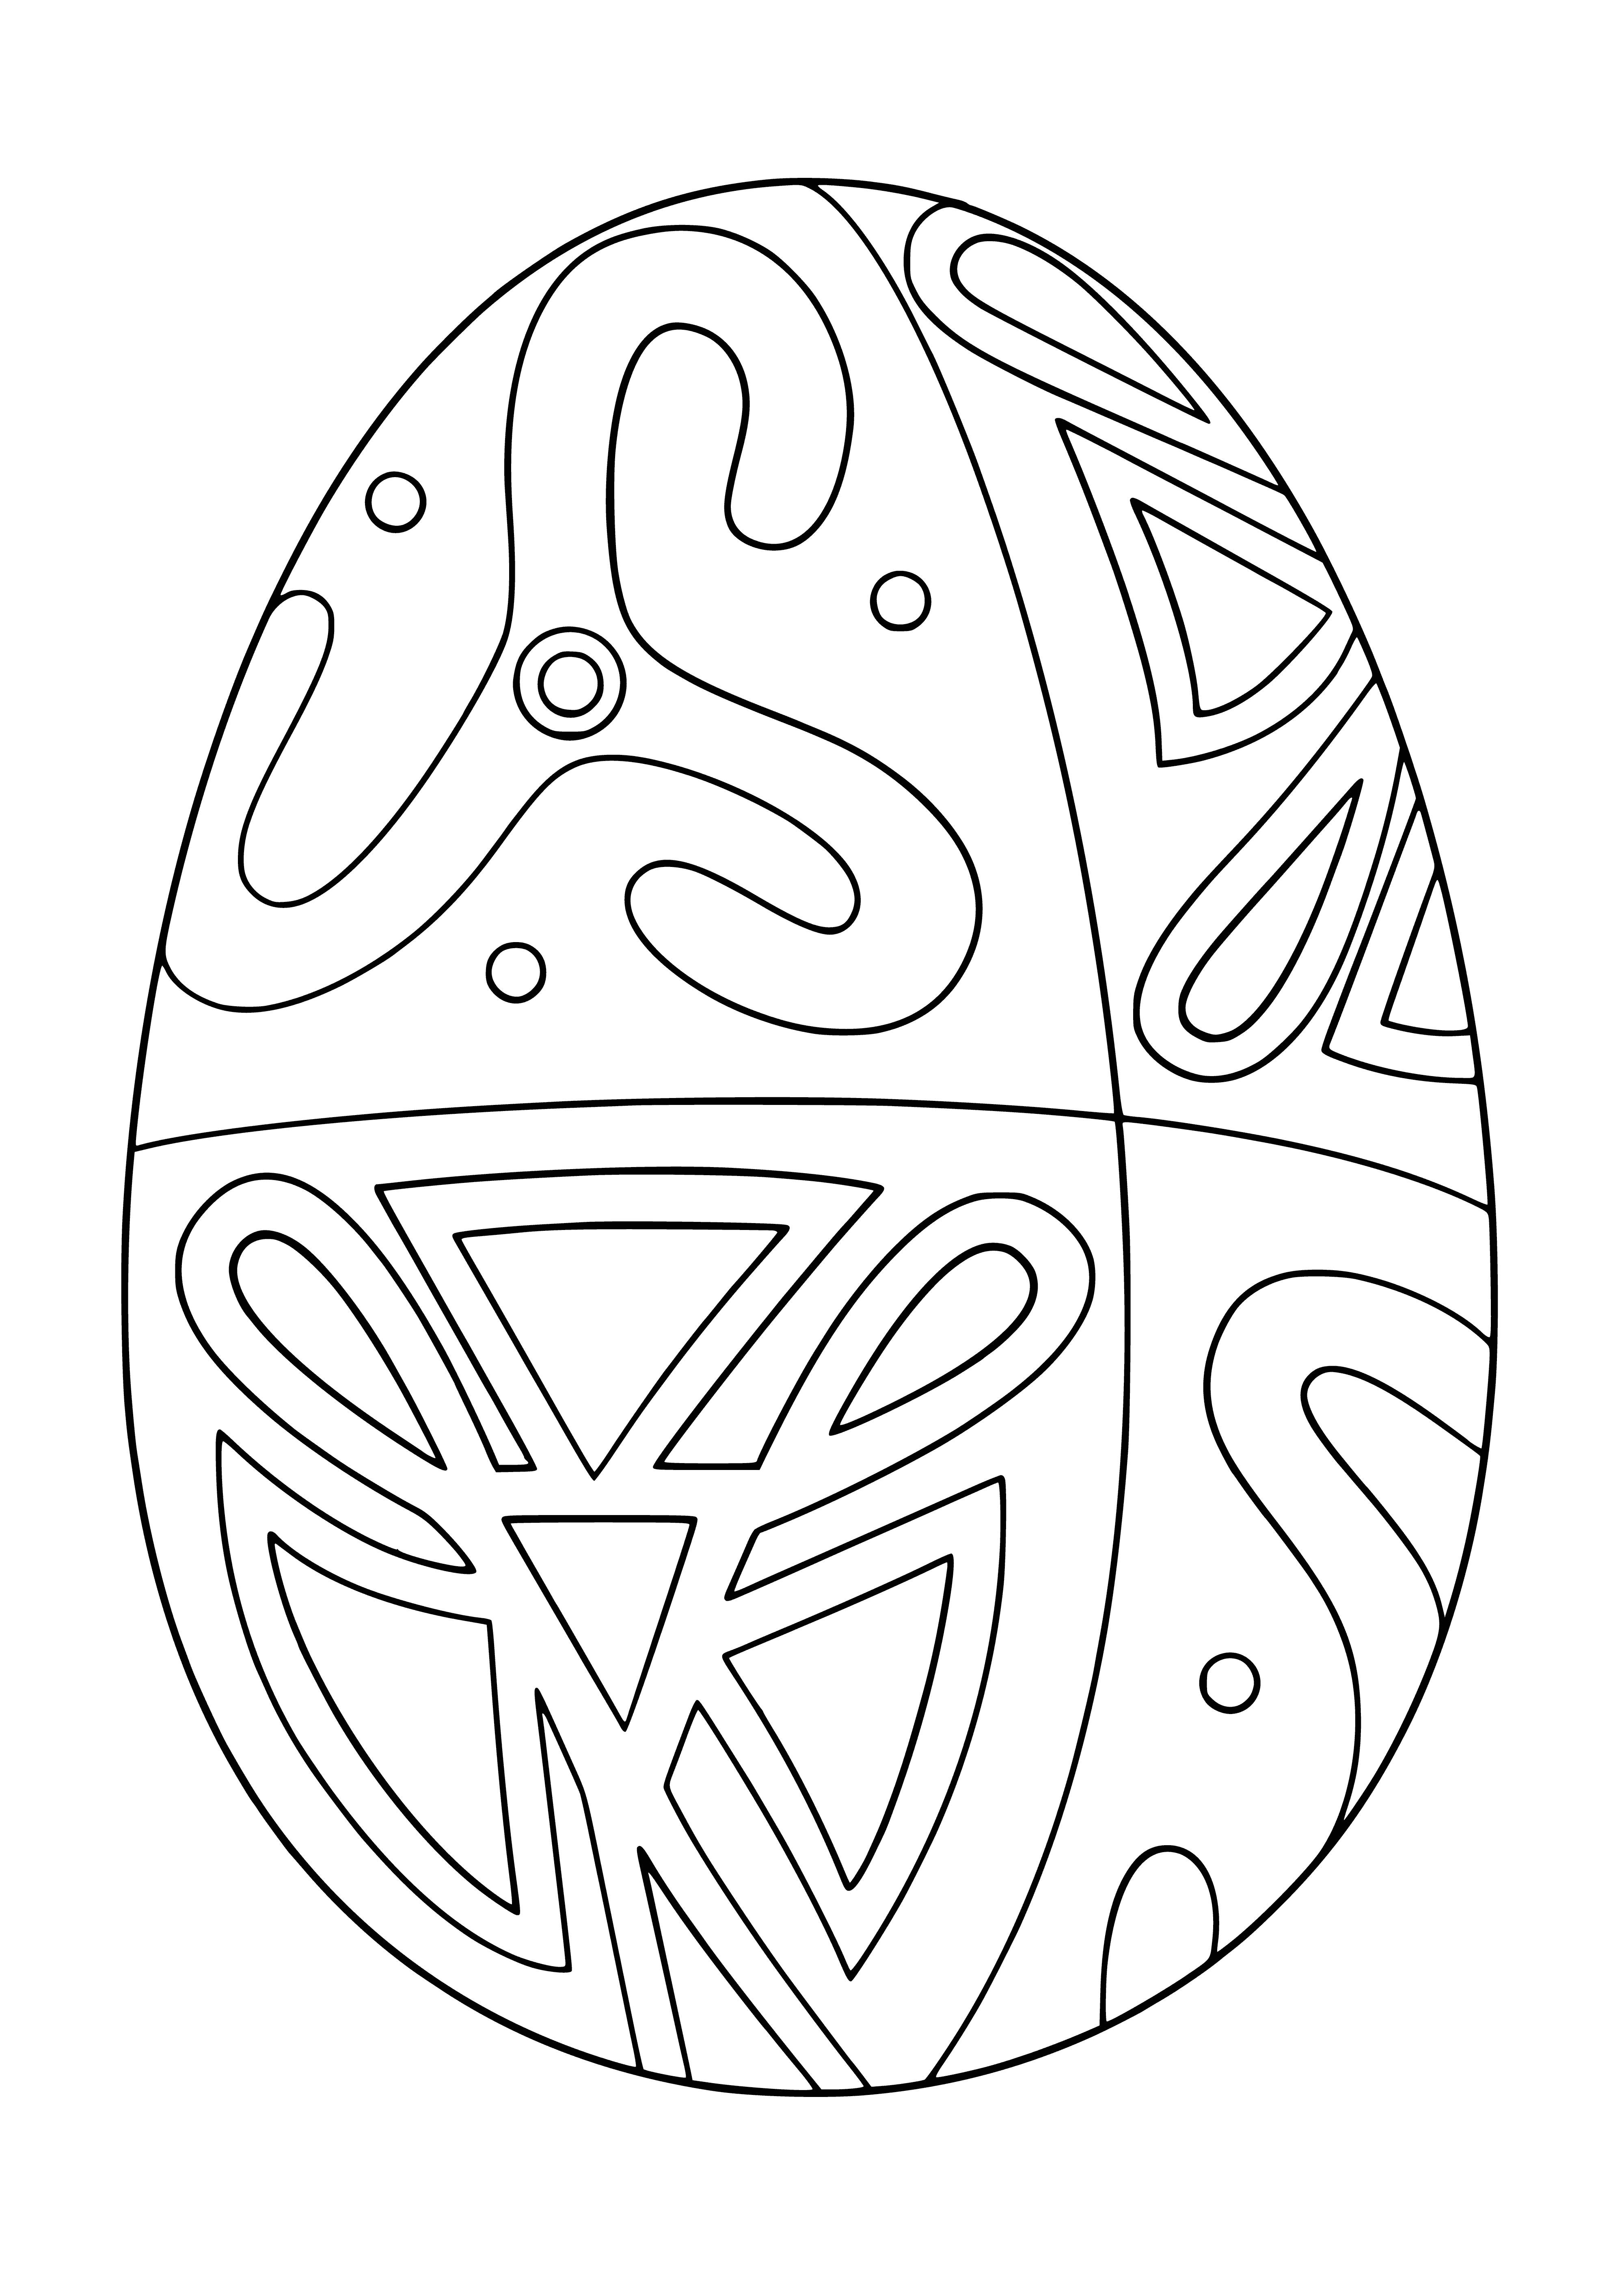 coloring page: Brightly colored Easter eggs come in yellow, green, blue, pink, and purple.